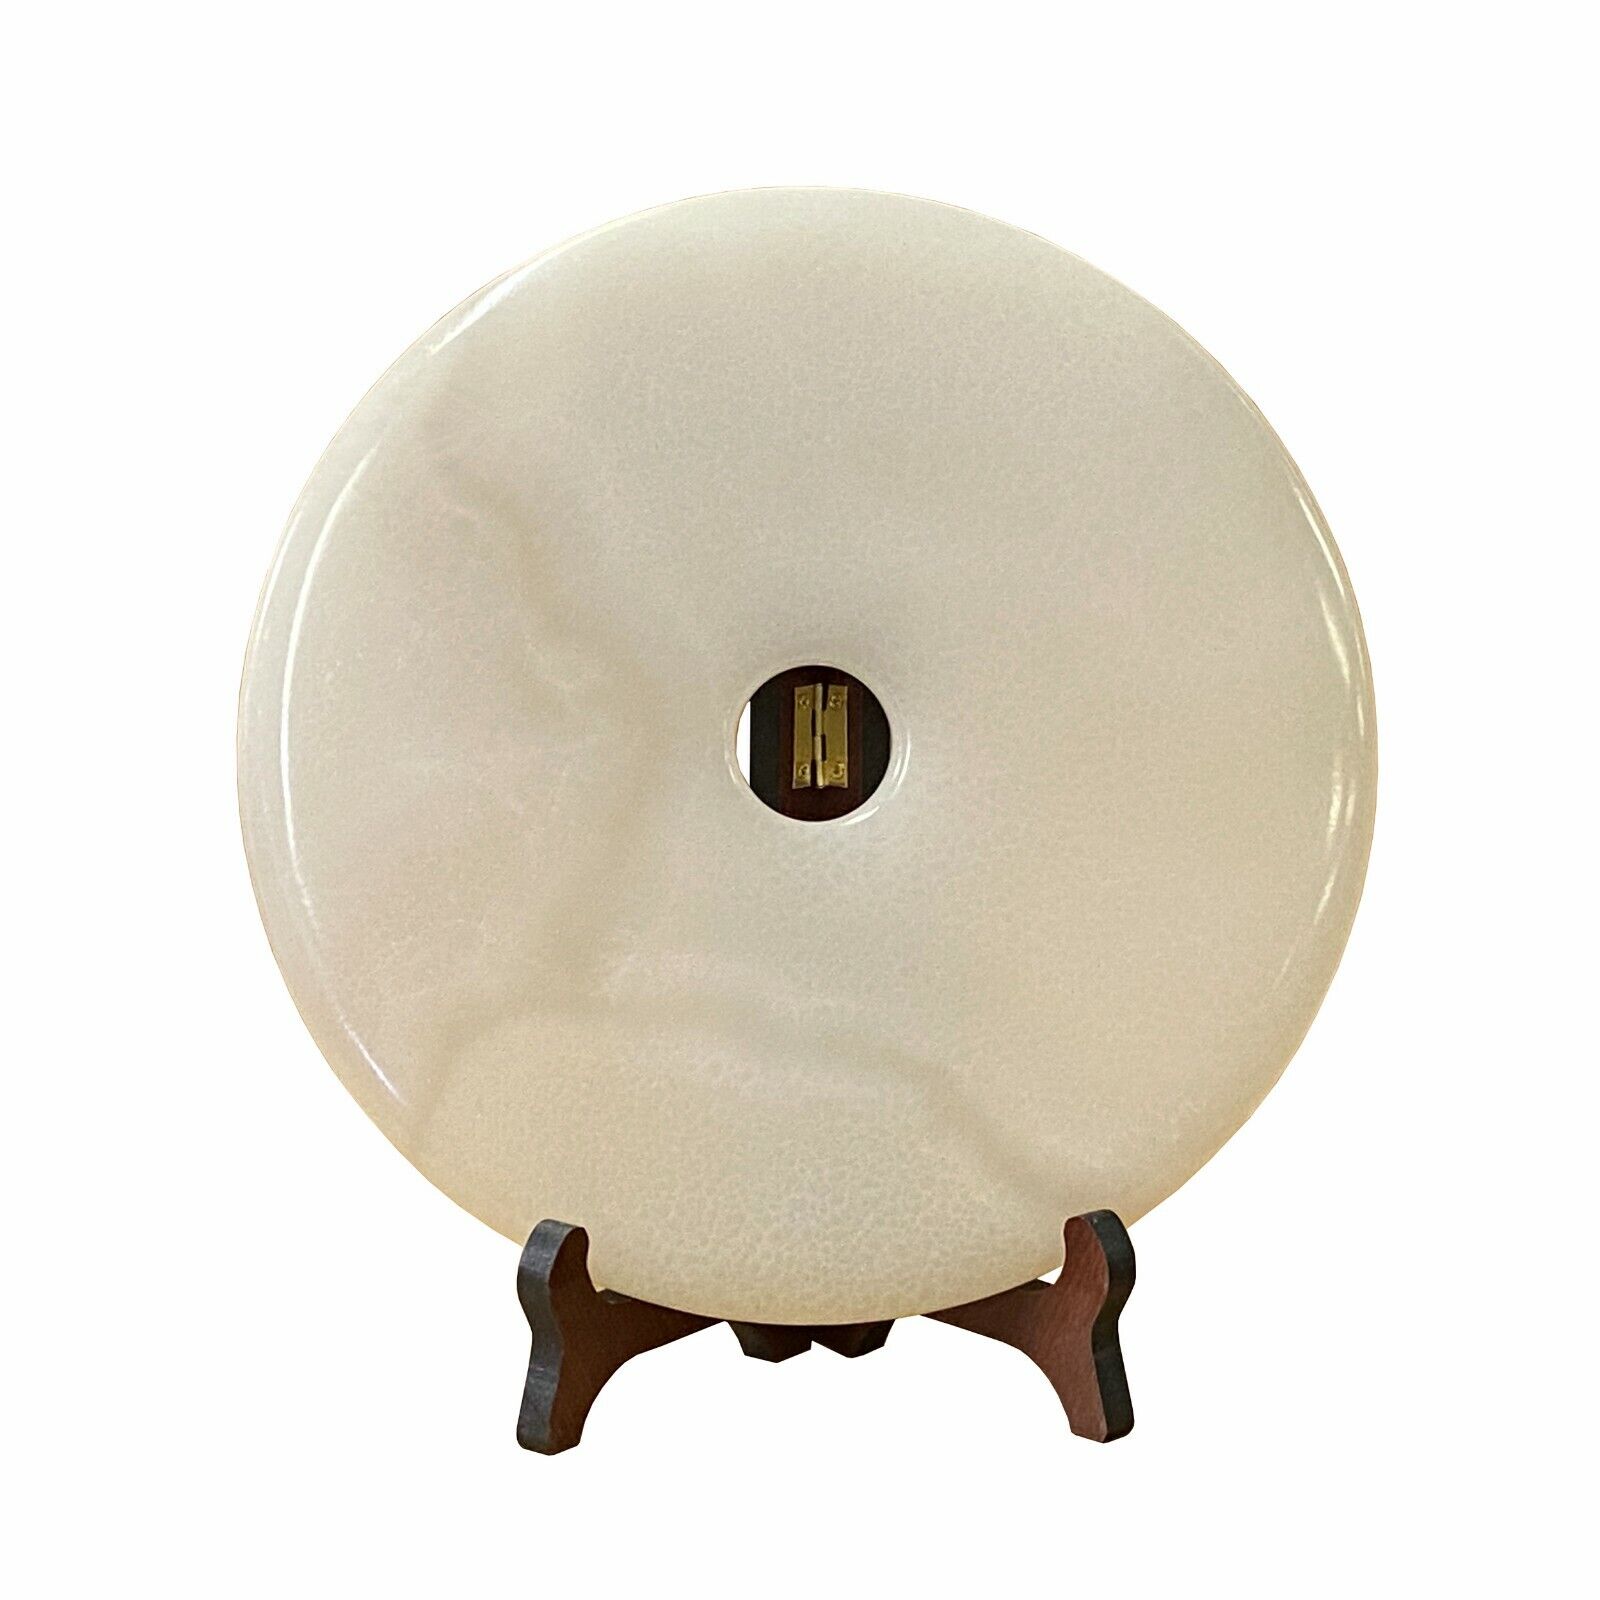 Chinese Natural White Stone Round Fengshui Home Decor Display ws1670